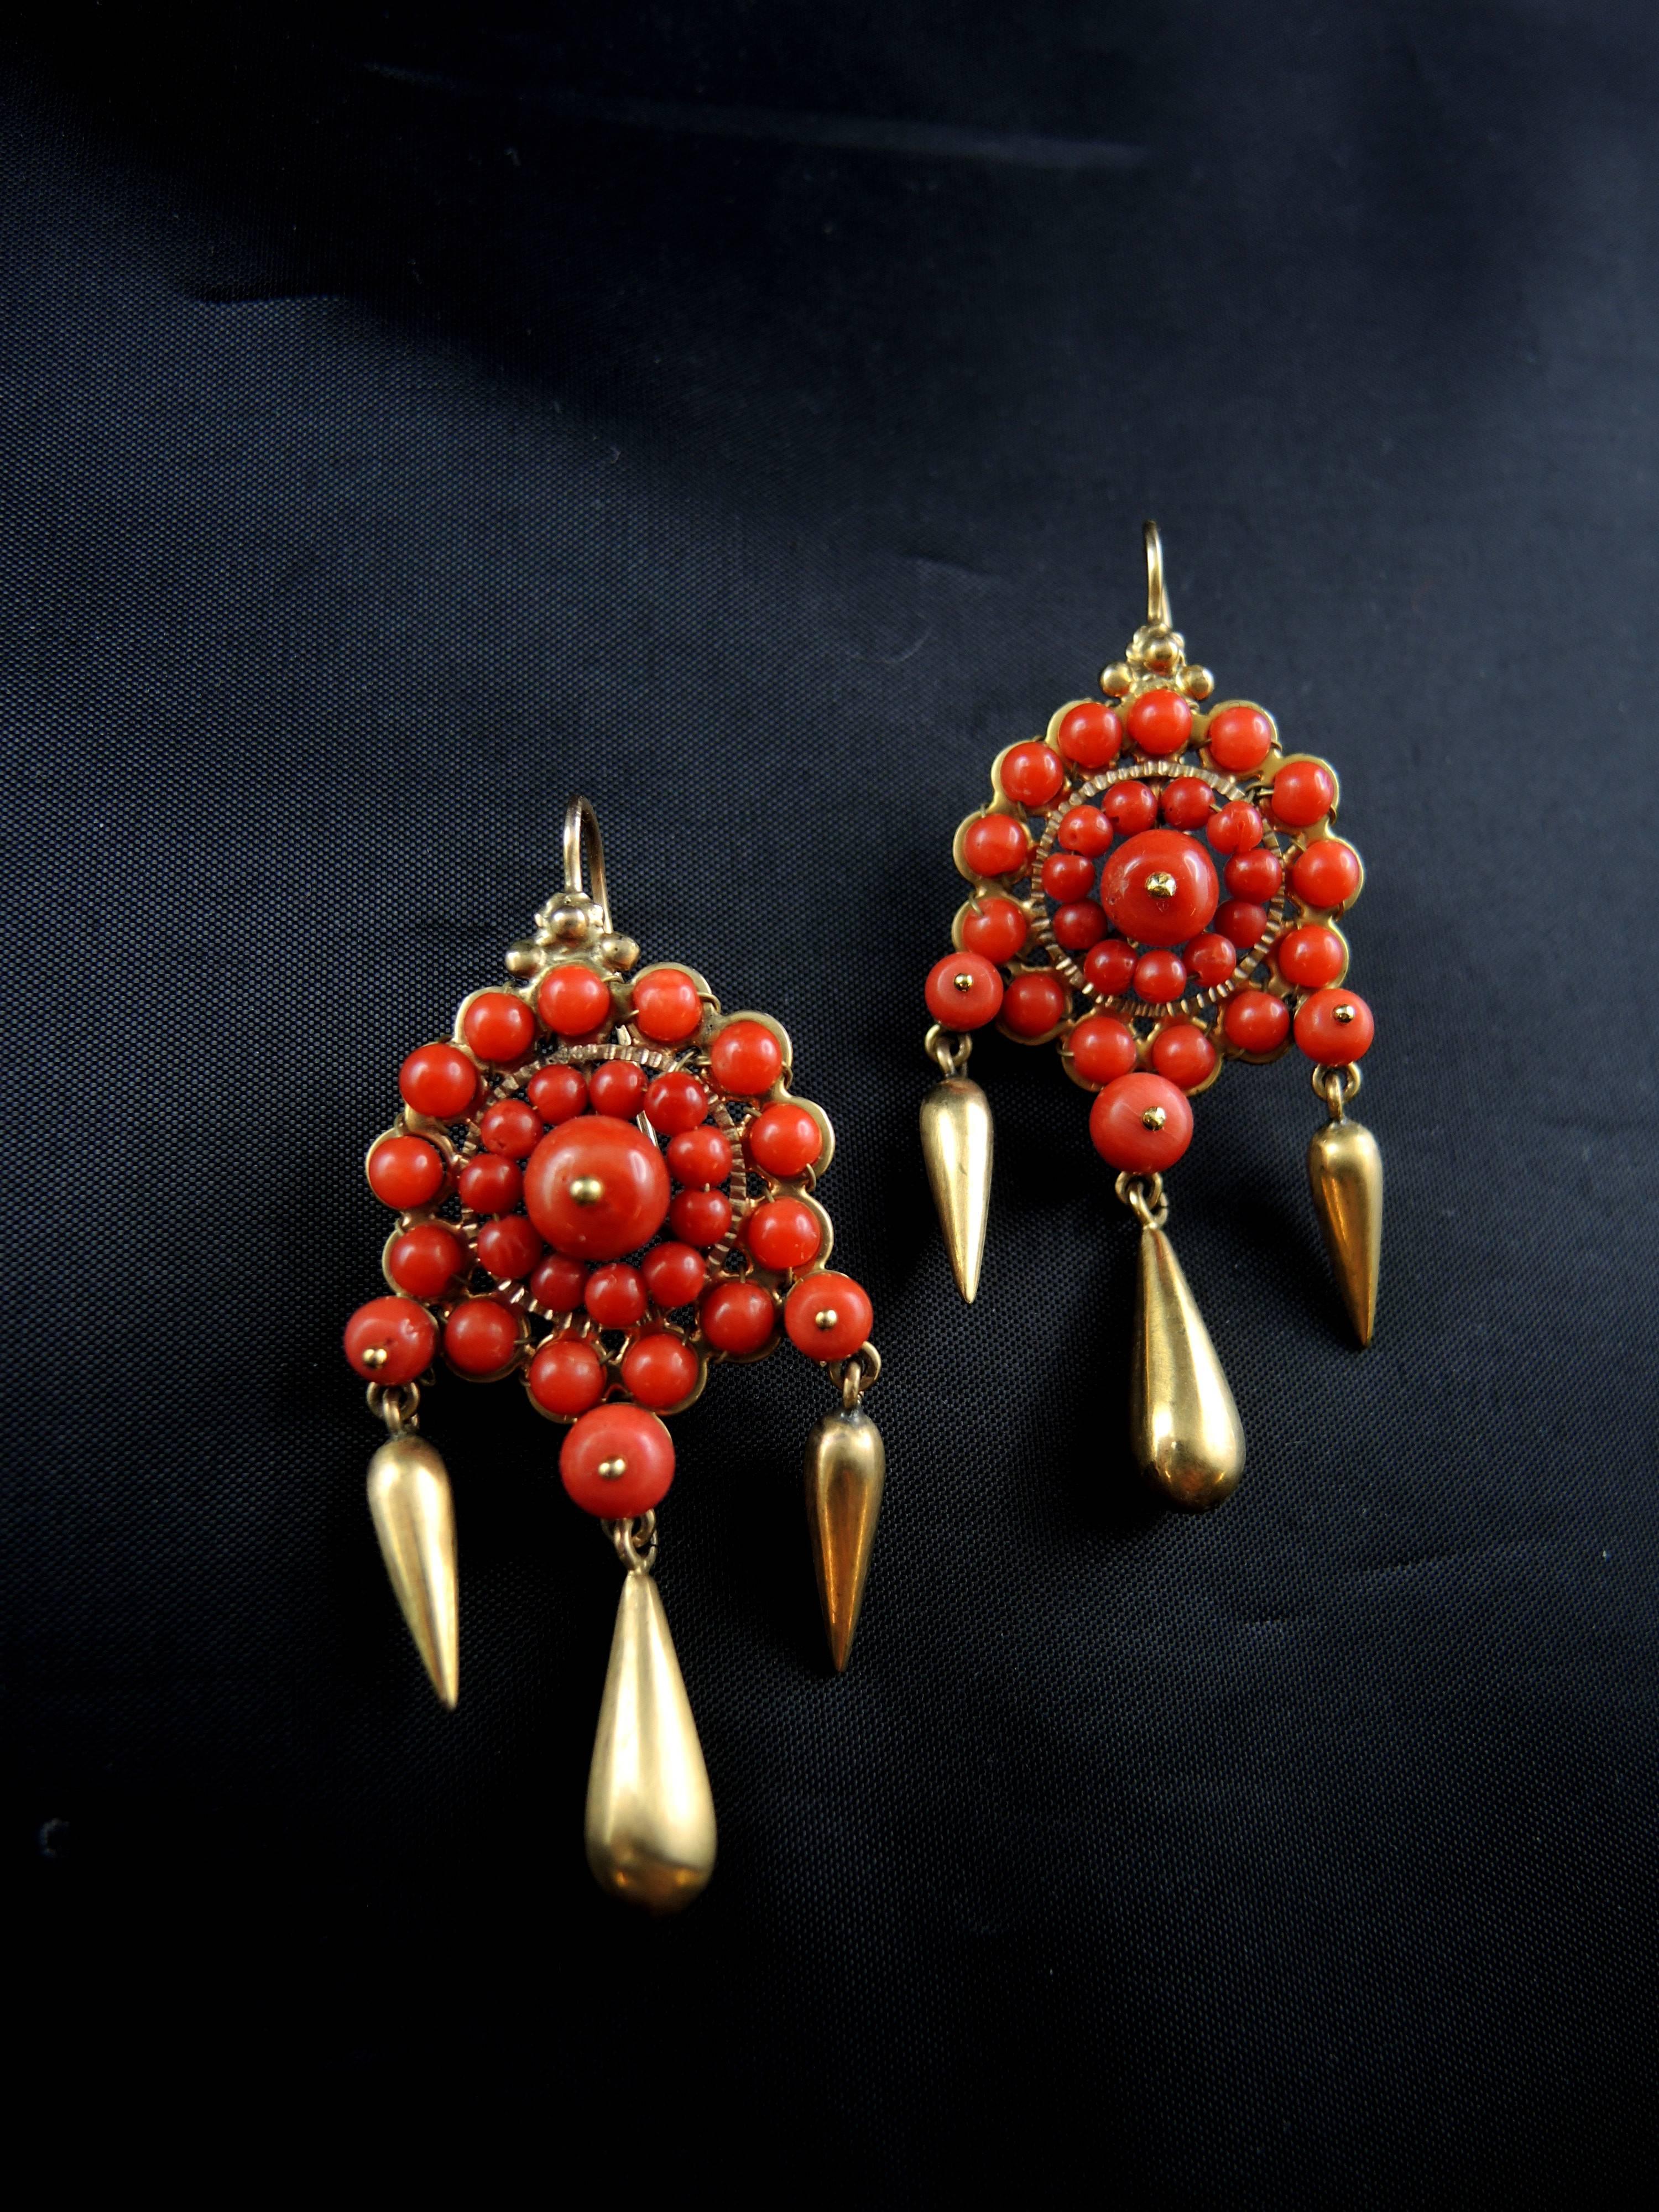 Stunning 9kt gold antique Chandelier Earrings (quality mark: clover) set with coral's pearls.

Italian work from the lat 19th century/ early 20th century.

Weight: 11,80 g
Height: 6,00 cm

State : very little scratches on the gold parts, and little